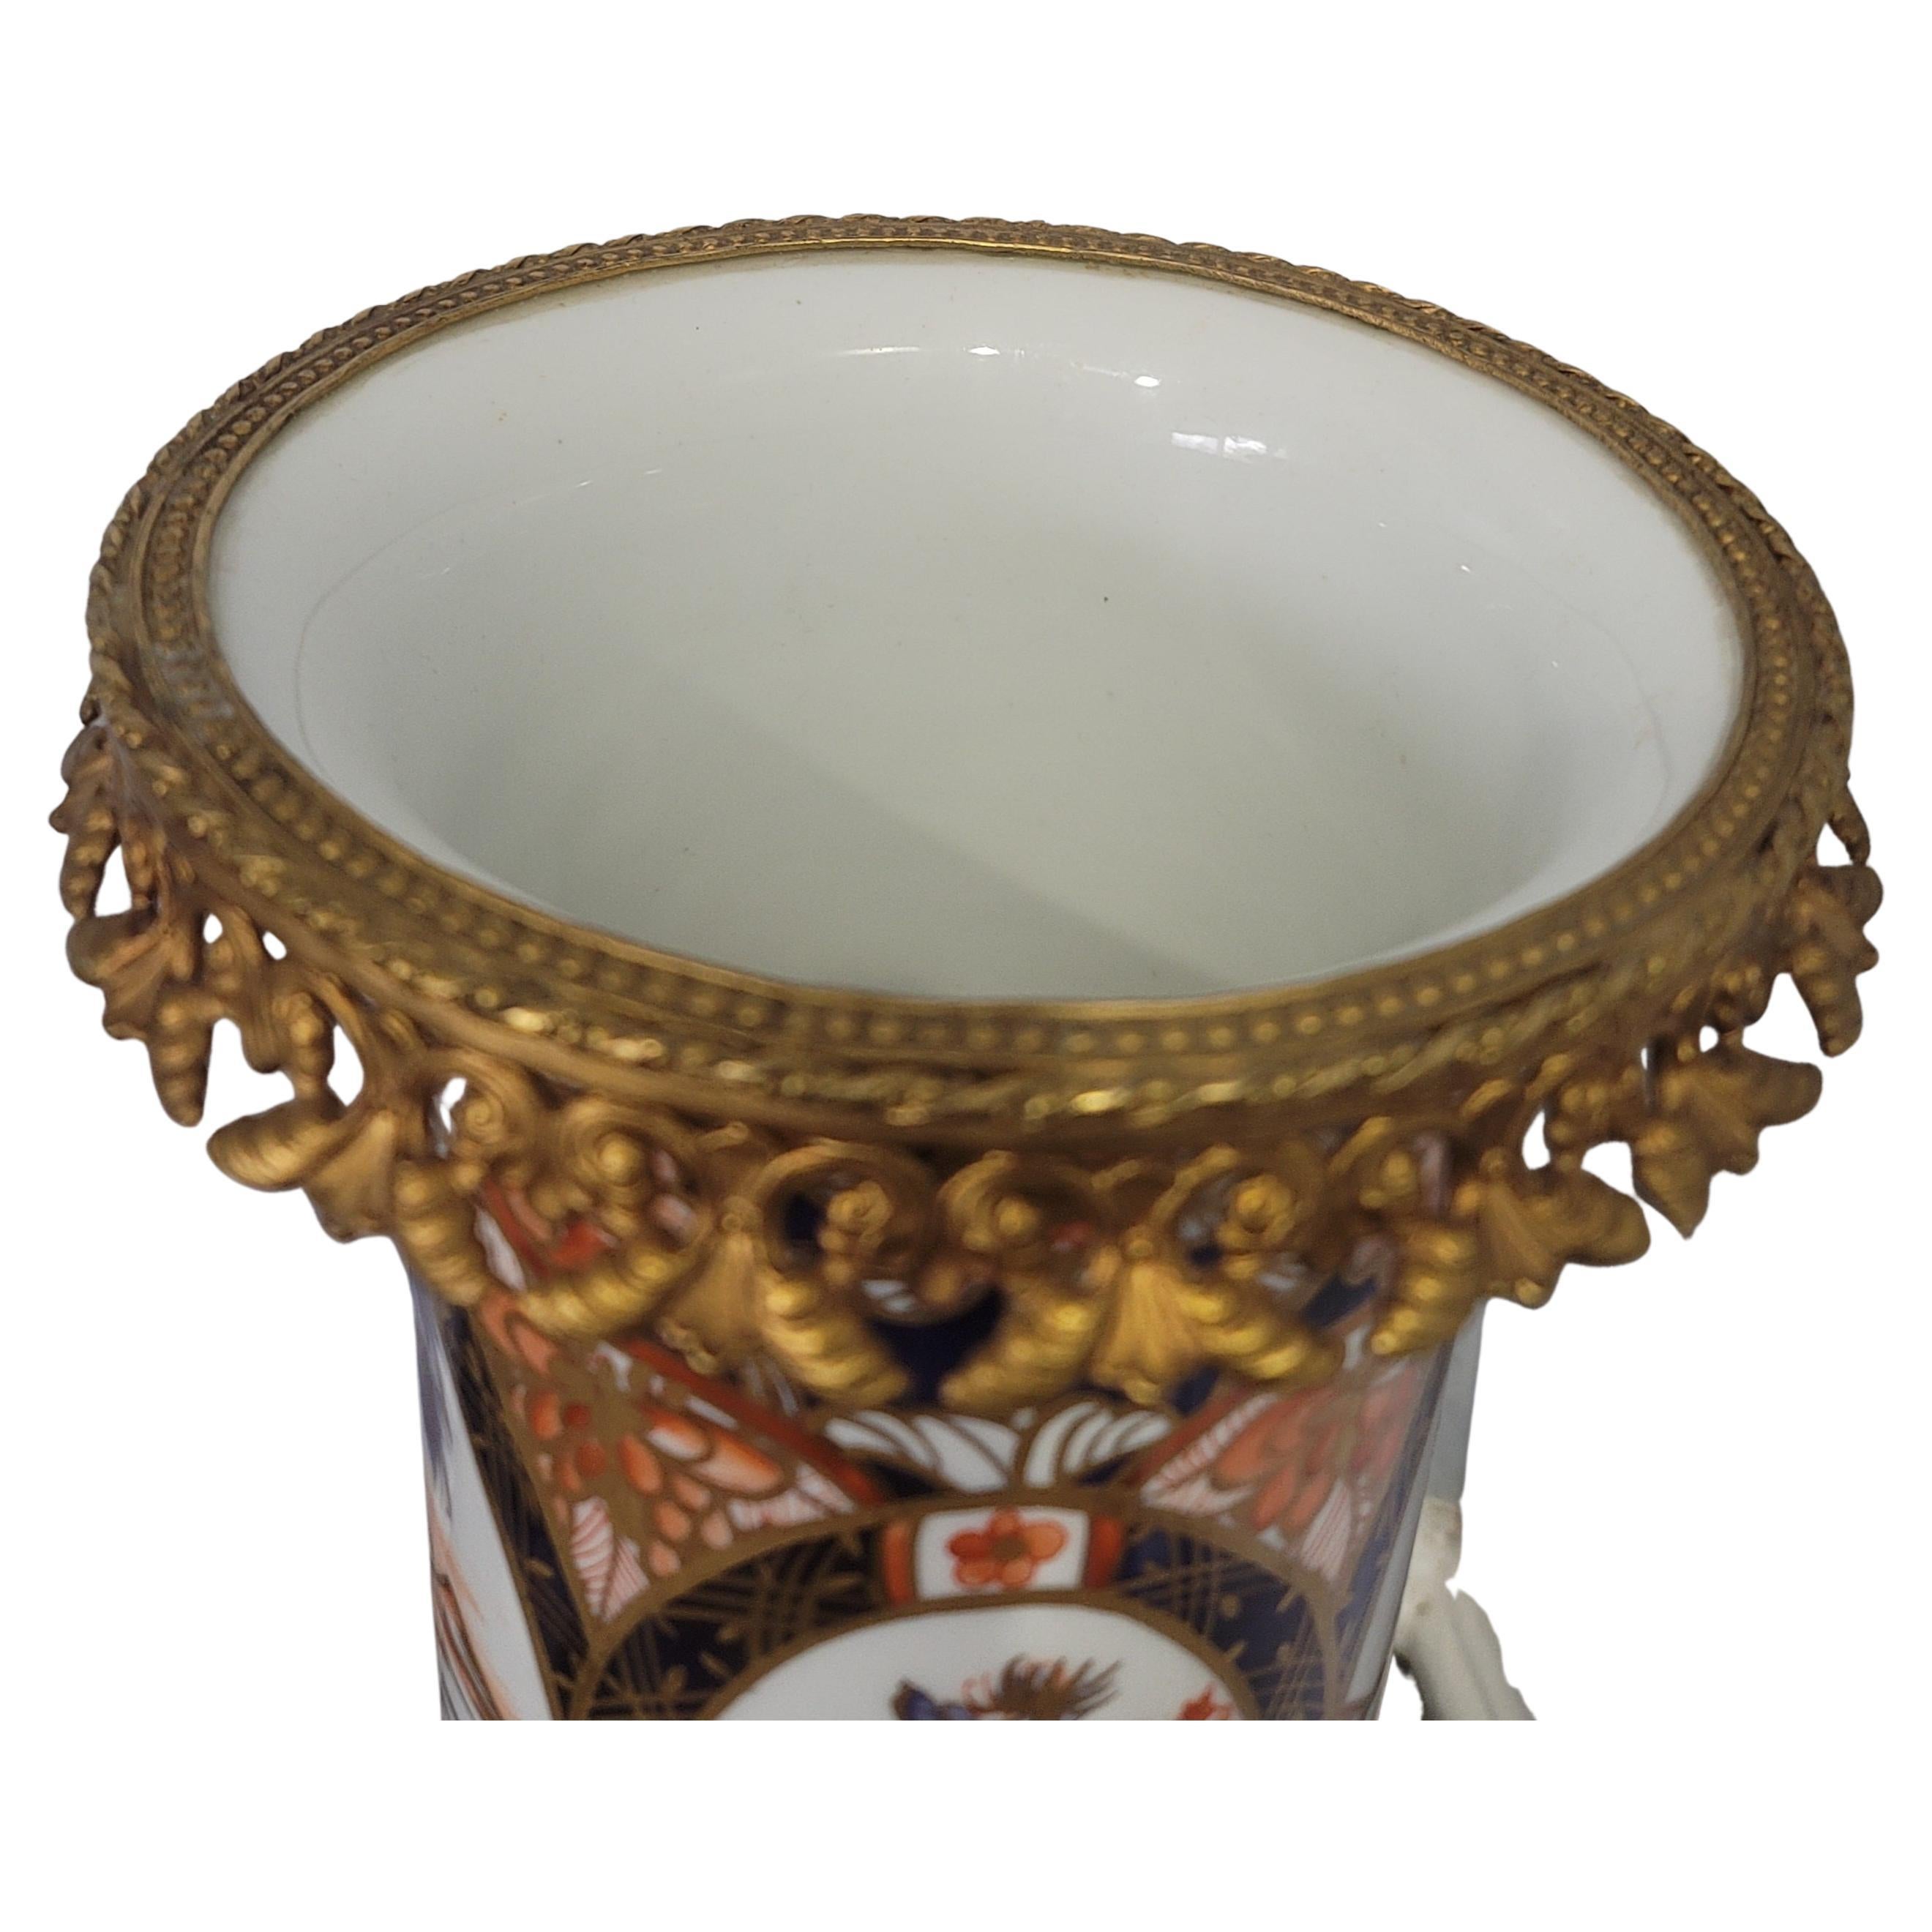 19th C. French Imari Porcelain Vase w/ Cast Brass Gallery and Base on Pawfeet In Good Condition For Sale In Germantown, MD